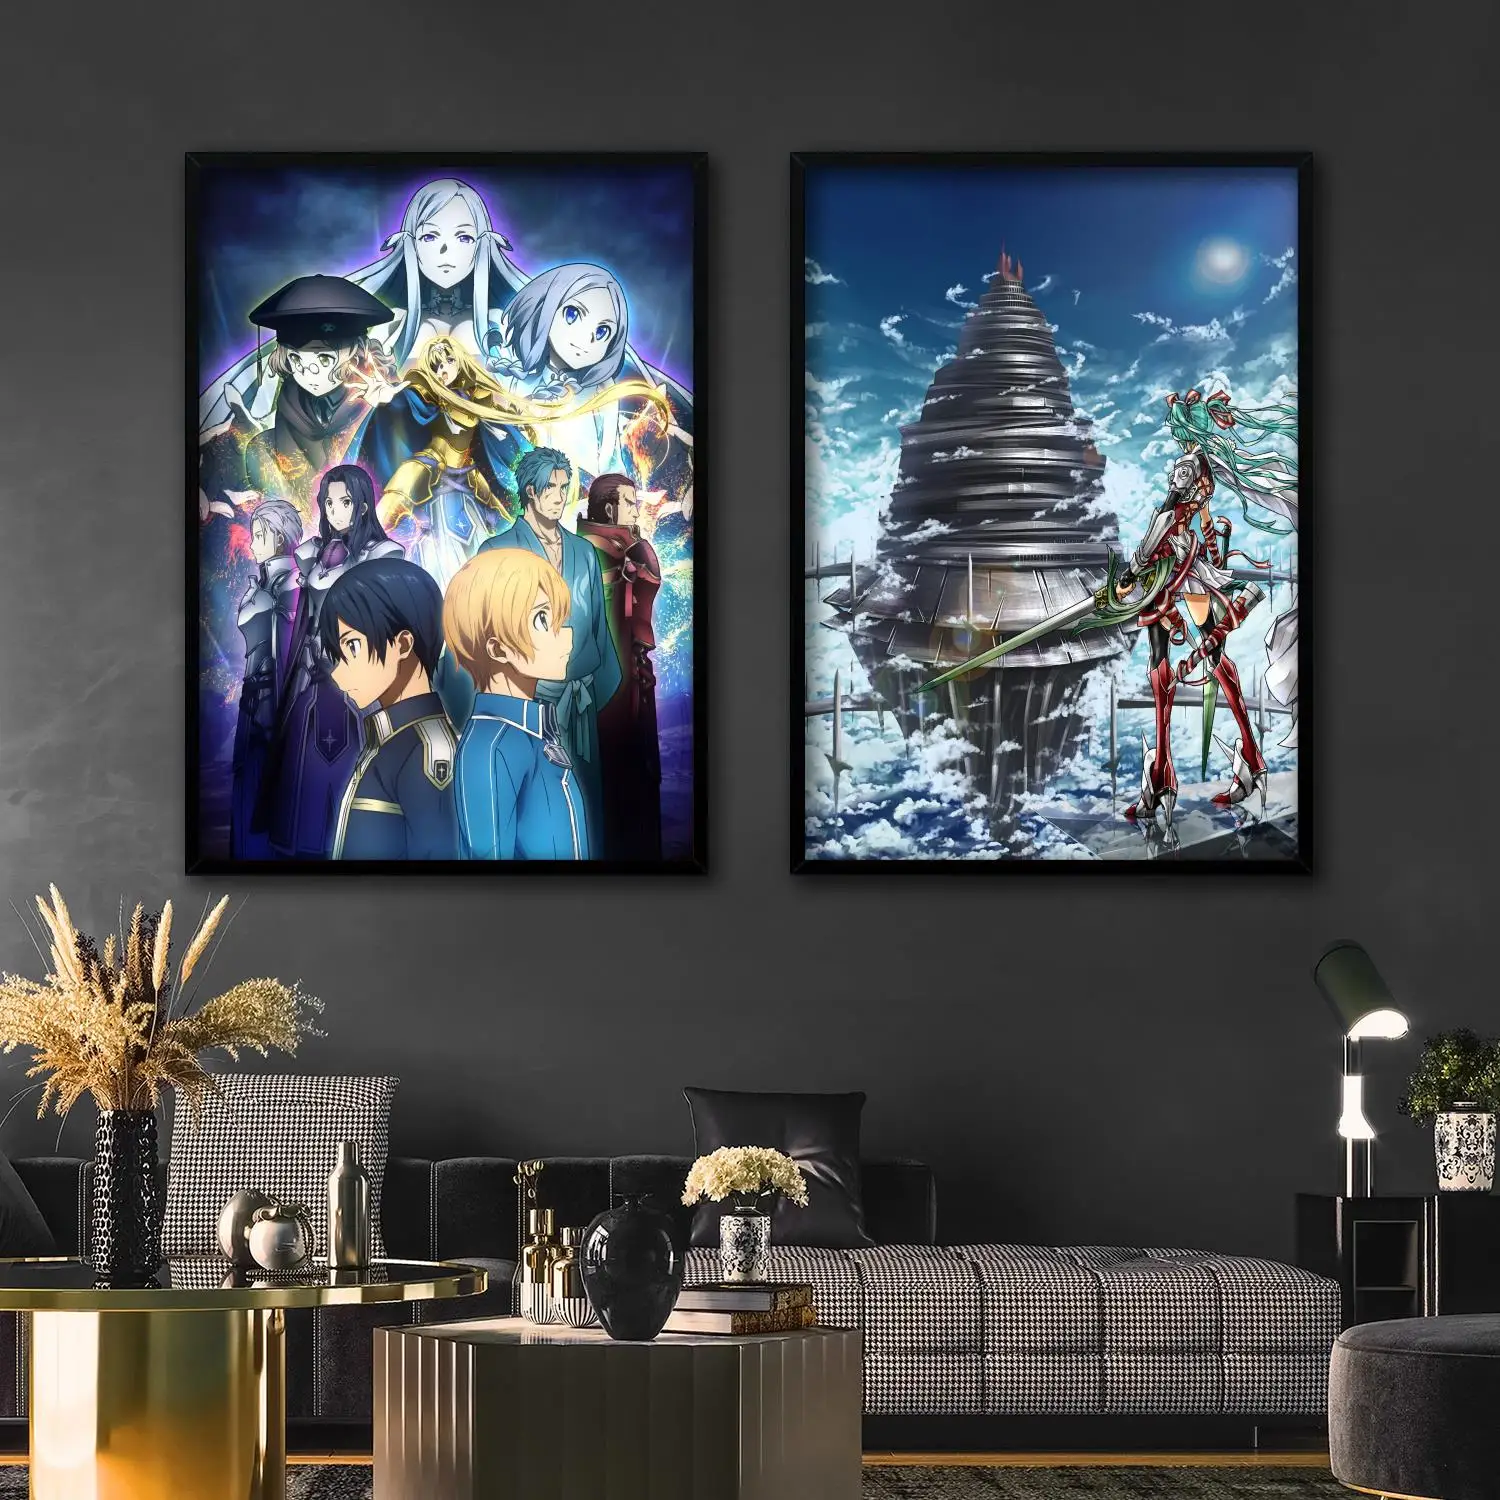 

sword art online aincrad manga poster Decorative Painting Canvas 24x36 Poster Wall Art Living Room Posters Bedroom Painting